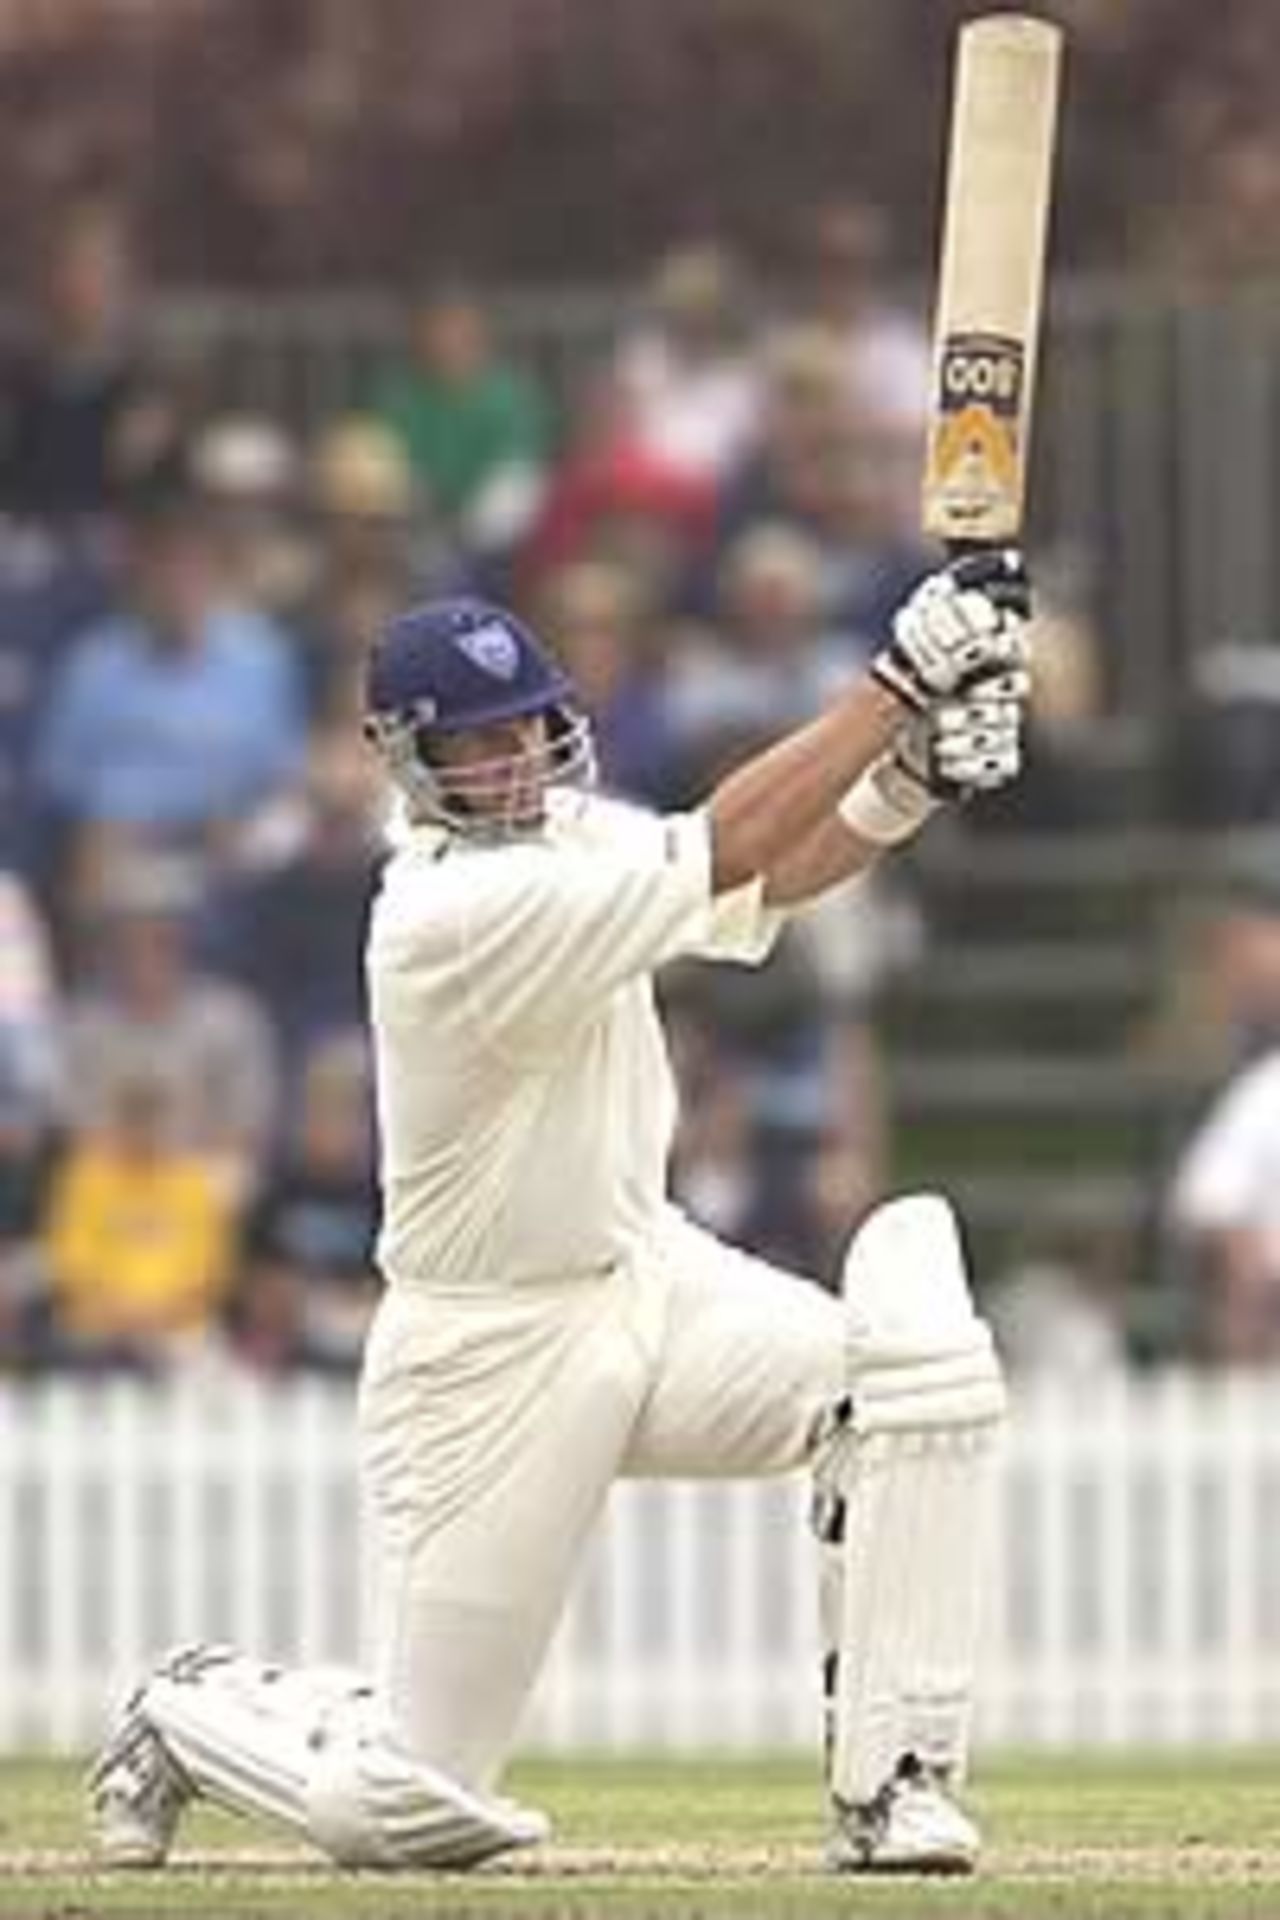 BOWRAL - JANUARY 8: Mark Waugh of the Bradmans XI hits out on his way t o a century during the Sir Donald Bradman XI v England One Day festival match at the Bradman Oval, Bowral, Australia on January 8, 2003.